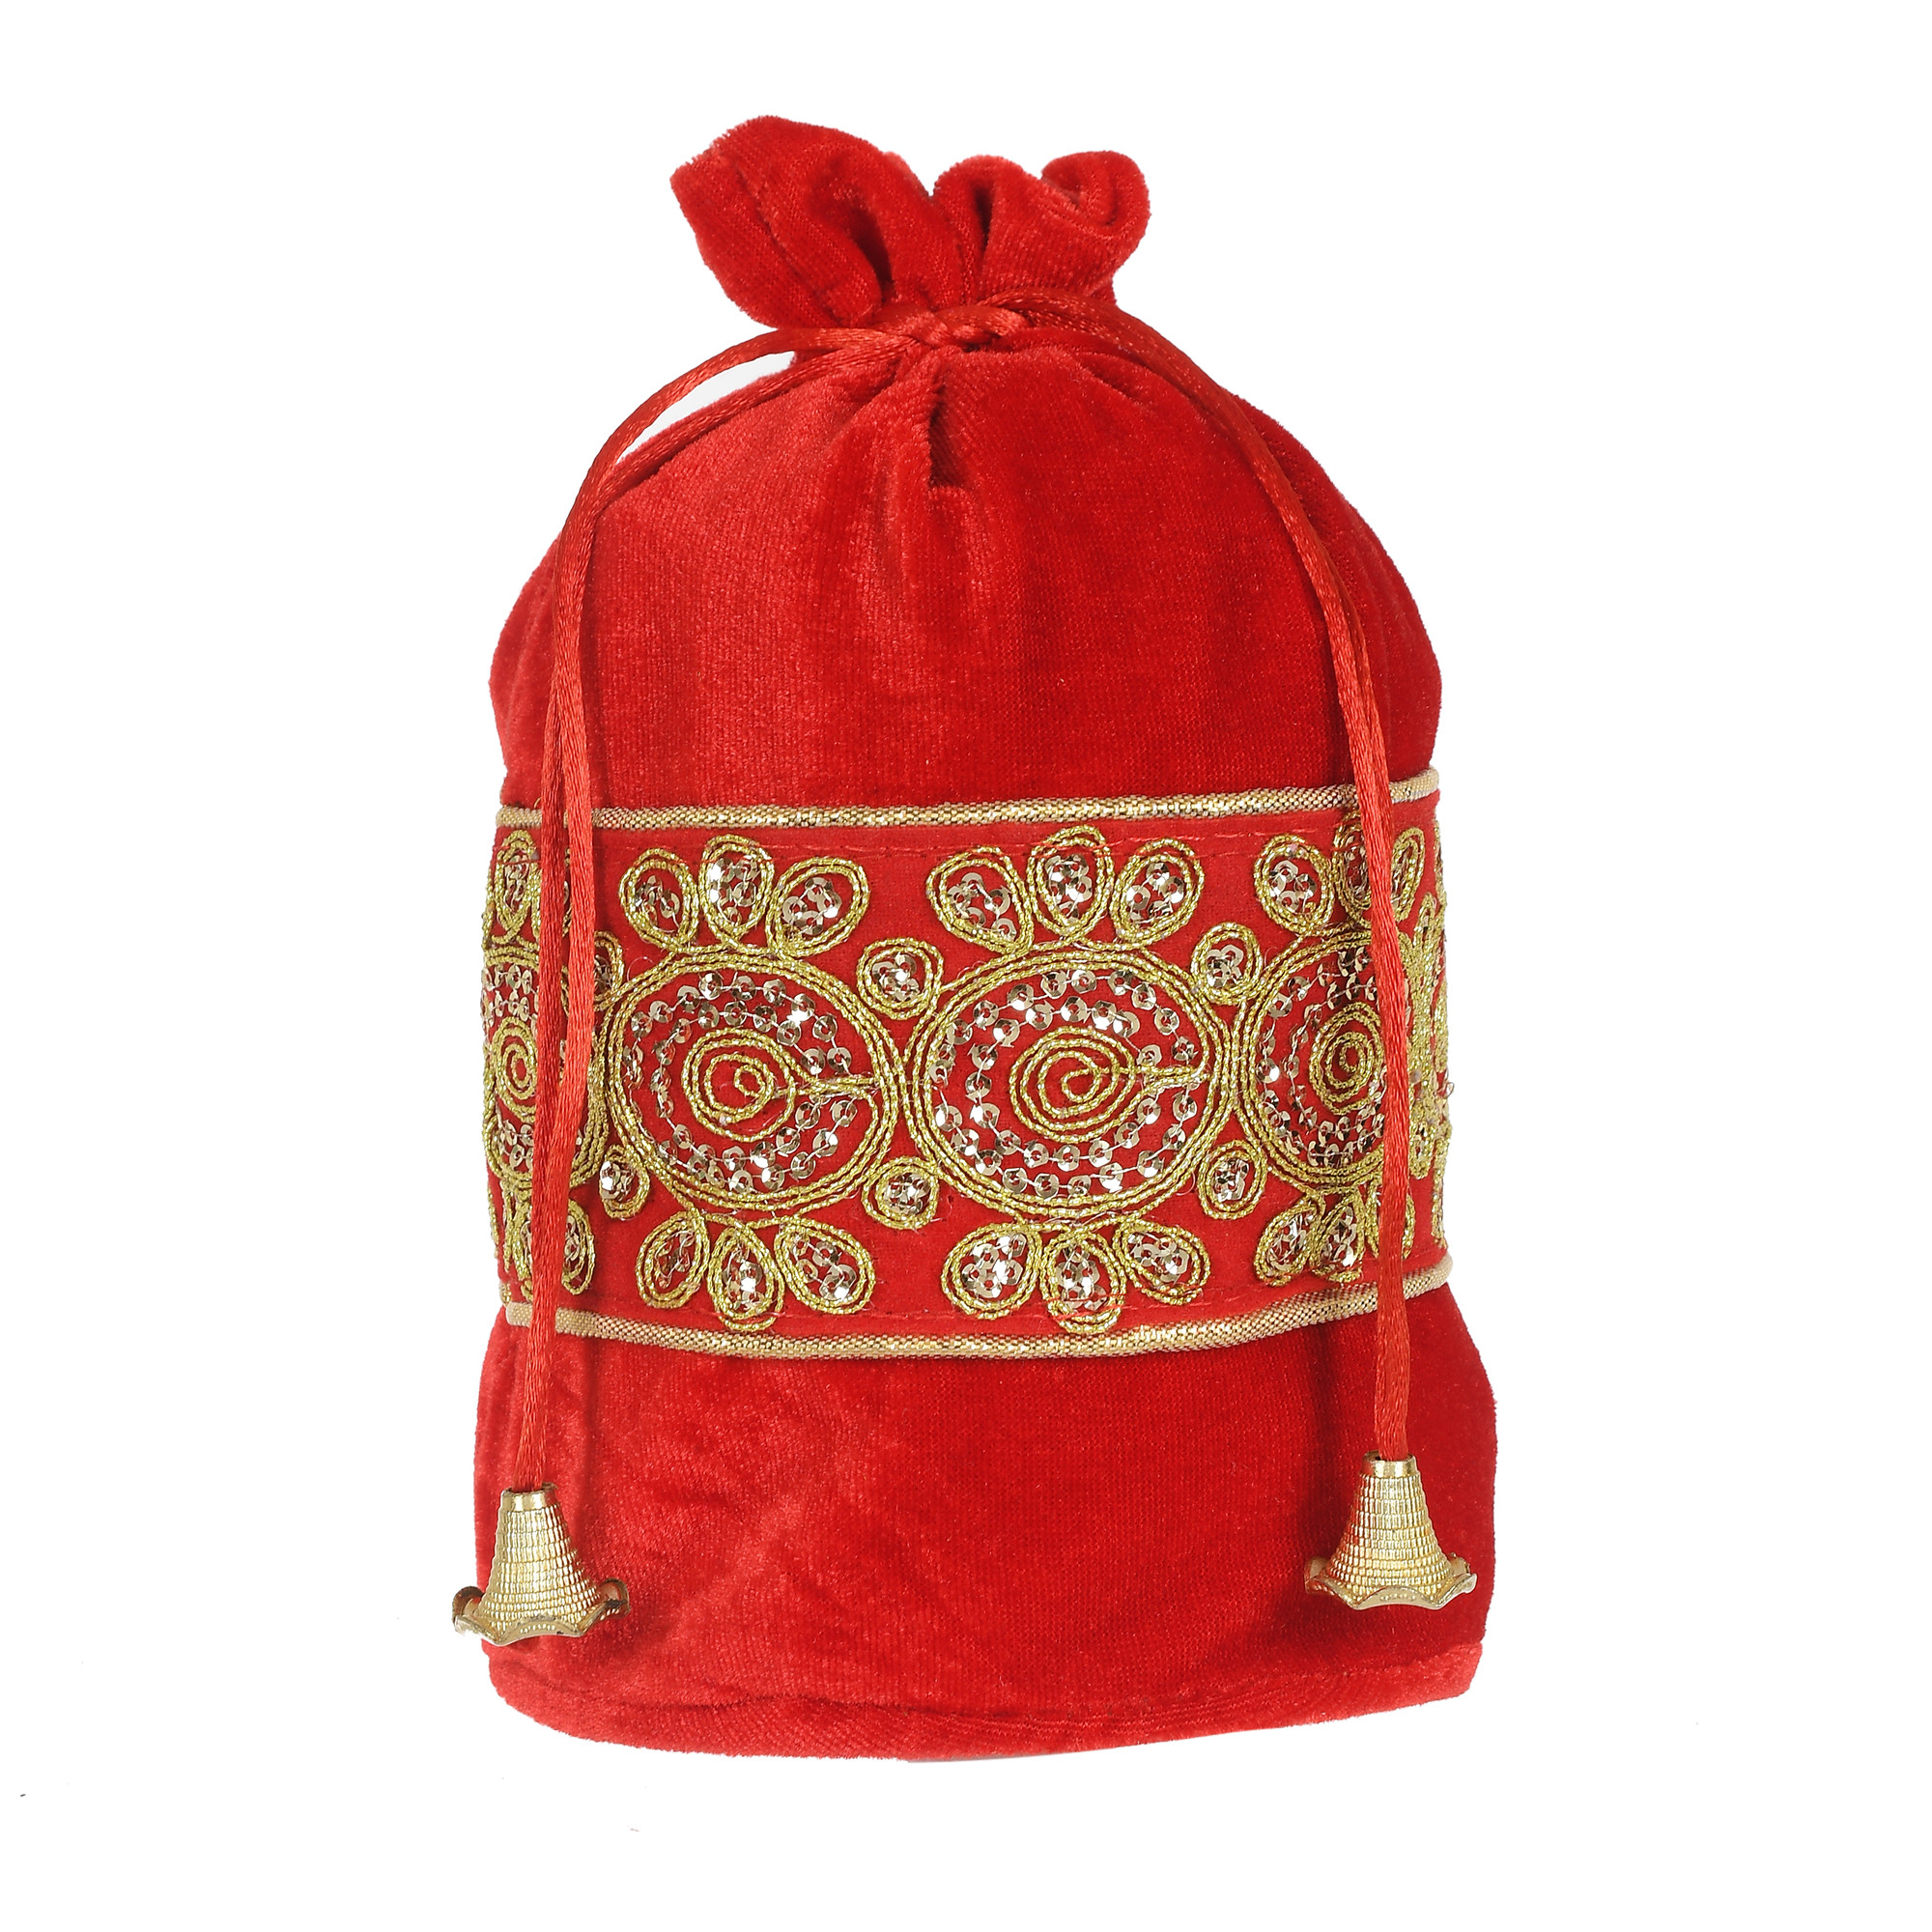 Kuber Industries Embroidered Design Drawstring Potli Bag Party Wedding Favor Gift Jewelry Bags-(Red & Pink & Yellow)